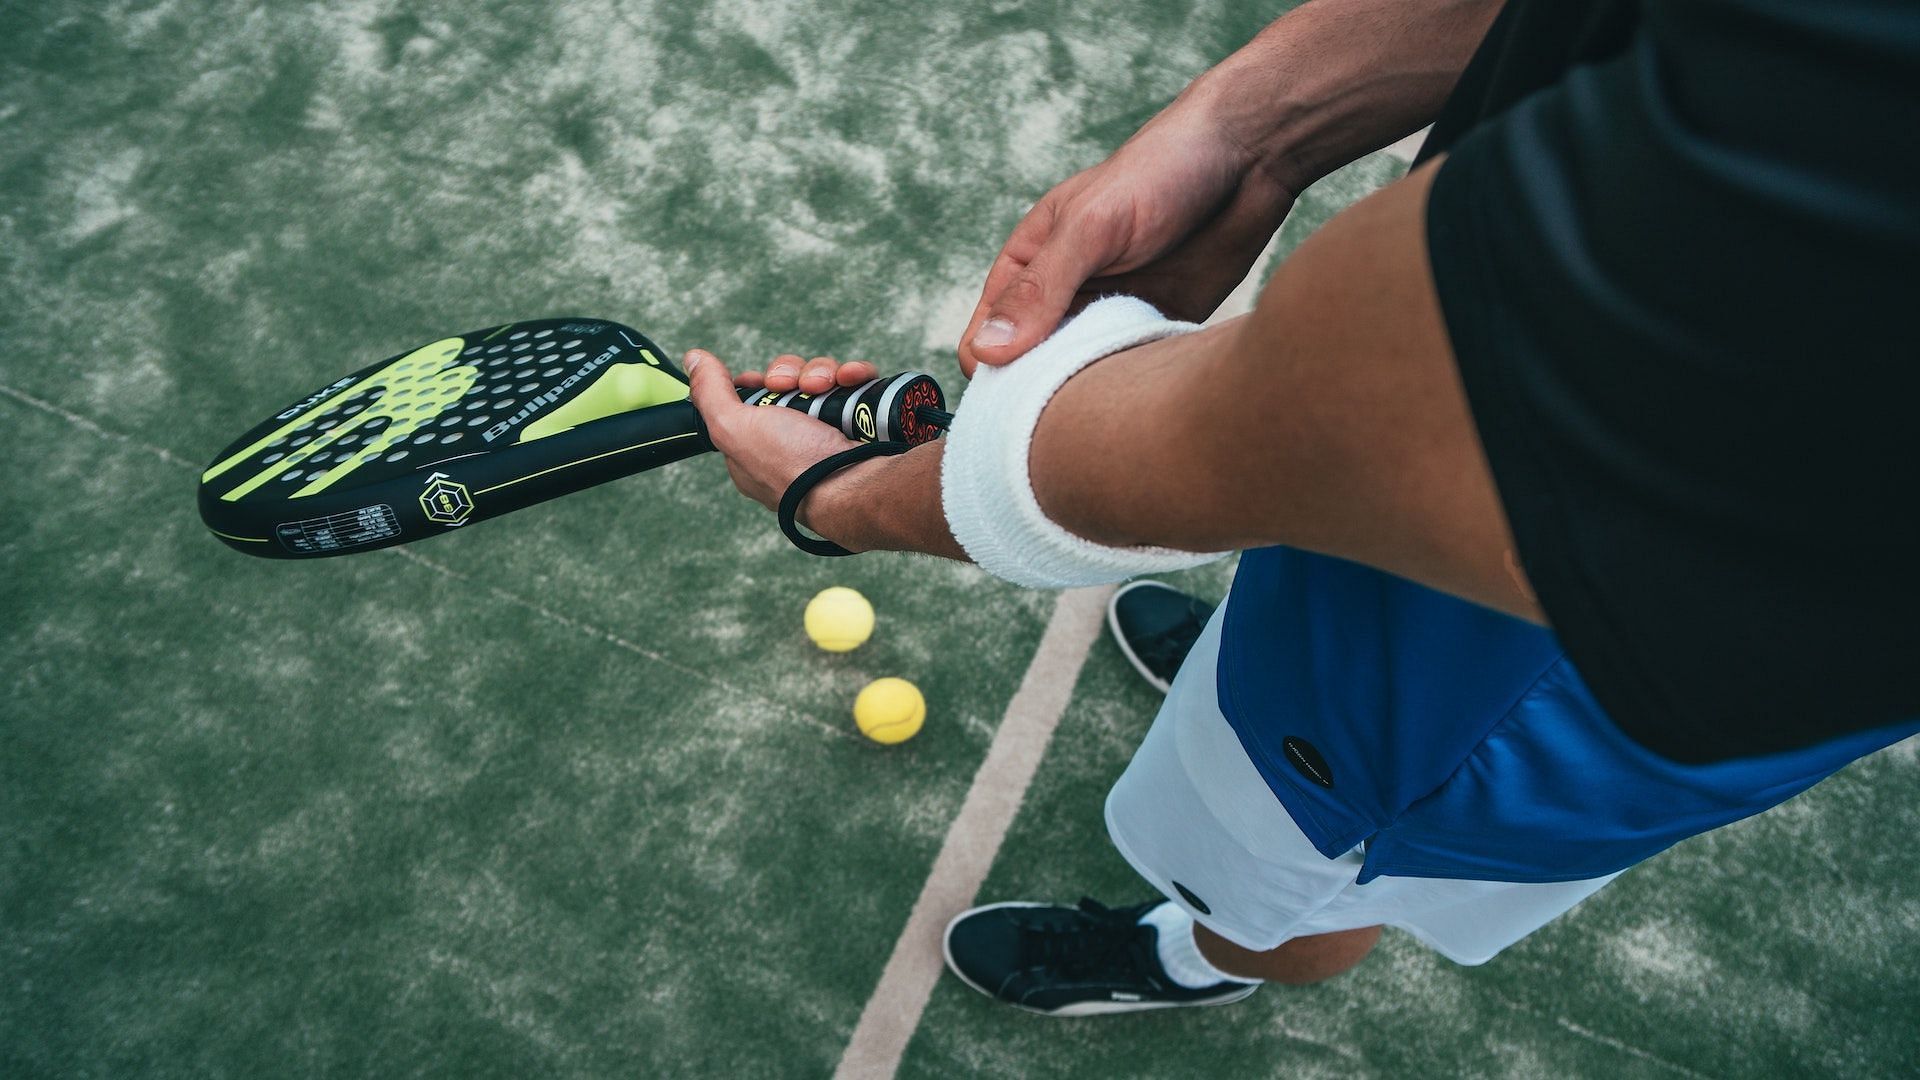 All about tennis elbow (Image via Pexels/Oliver Sjostrom)